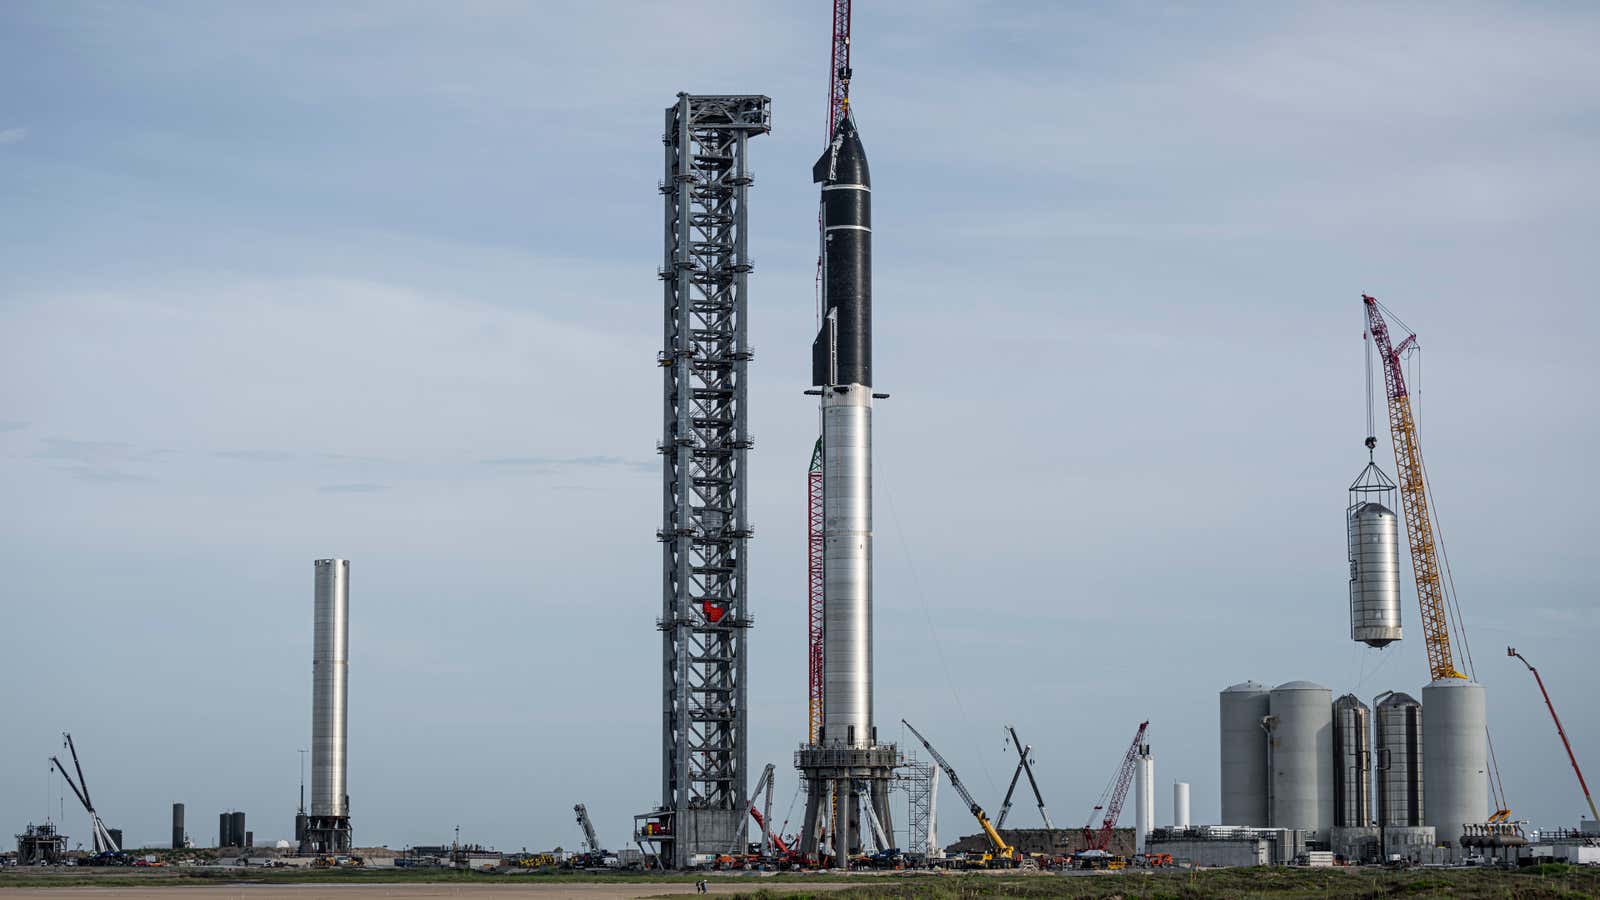 SpaceX’s Starship, which was chosen by NASA to deliver astronauts to the moon, on a launch pad in Texas.